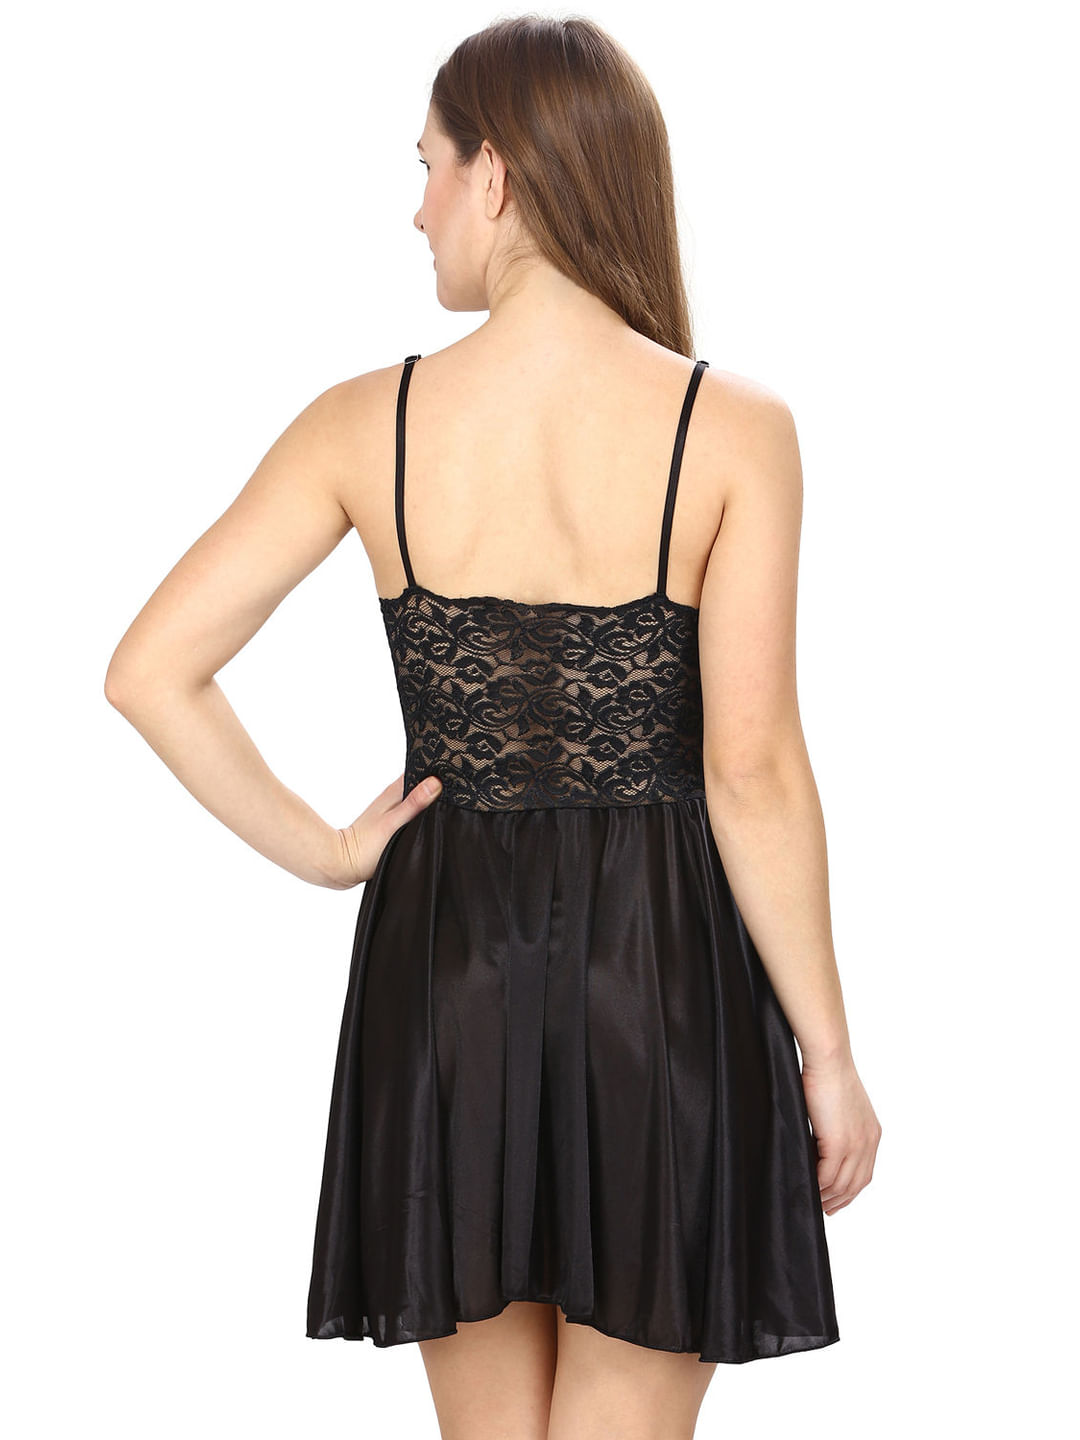 Buy Satin and Lace Black Babydoll Lingerie (Free Size) for Women Online at  Secret Wish